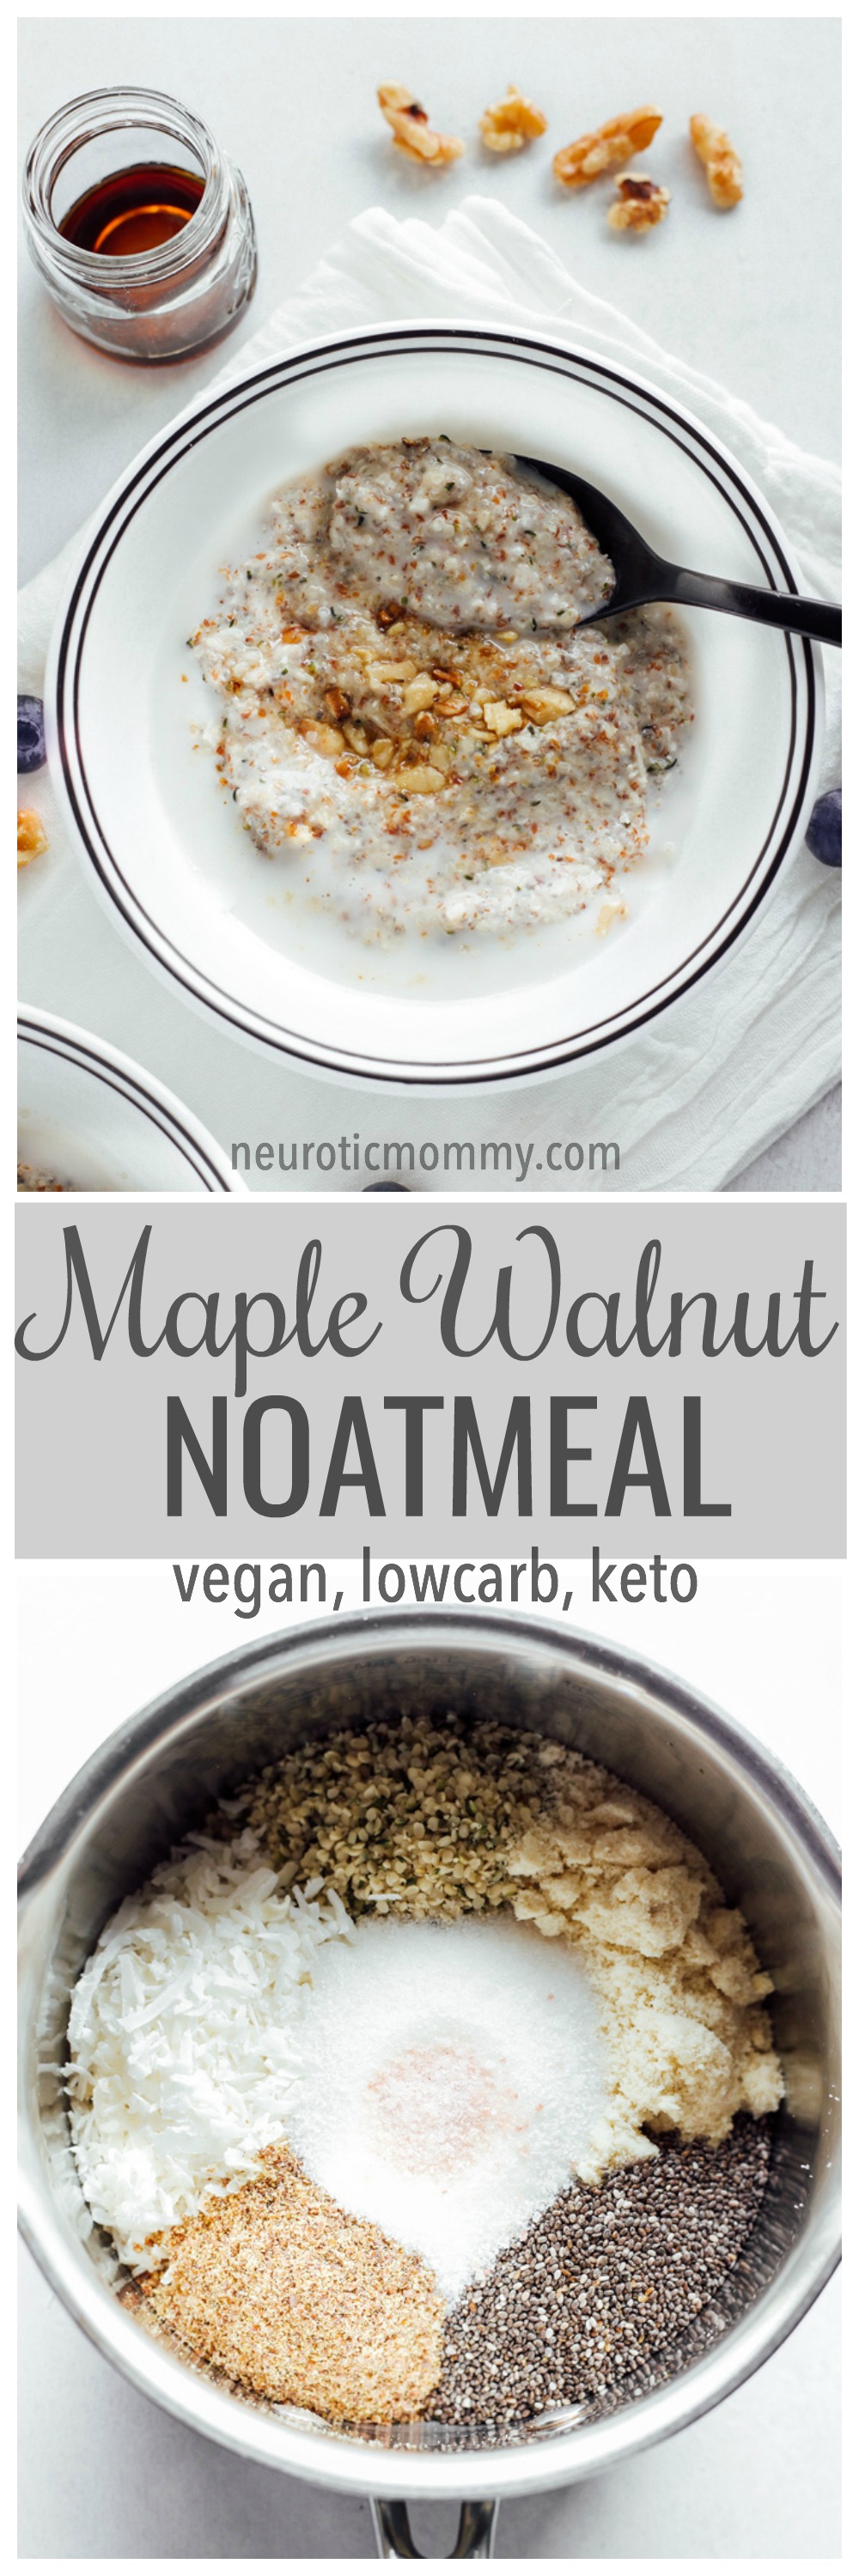 Maple Walnut Noatmeal - this is the creamiest, warm oat free oatmeal ever! It's easy, super healthy, low carb, kept friendly and fun to make. 3 net carbs per serving. NeuroticMommy.com #vegan #keto #breakfast #lowcarb